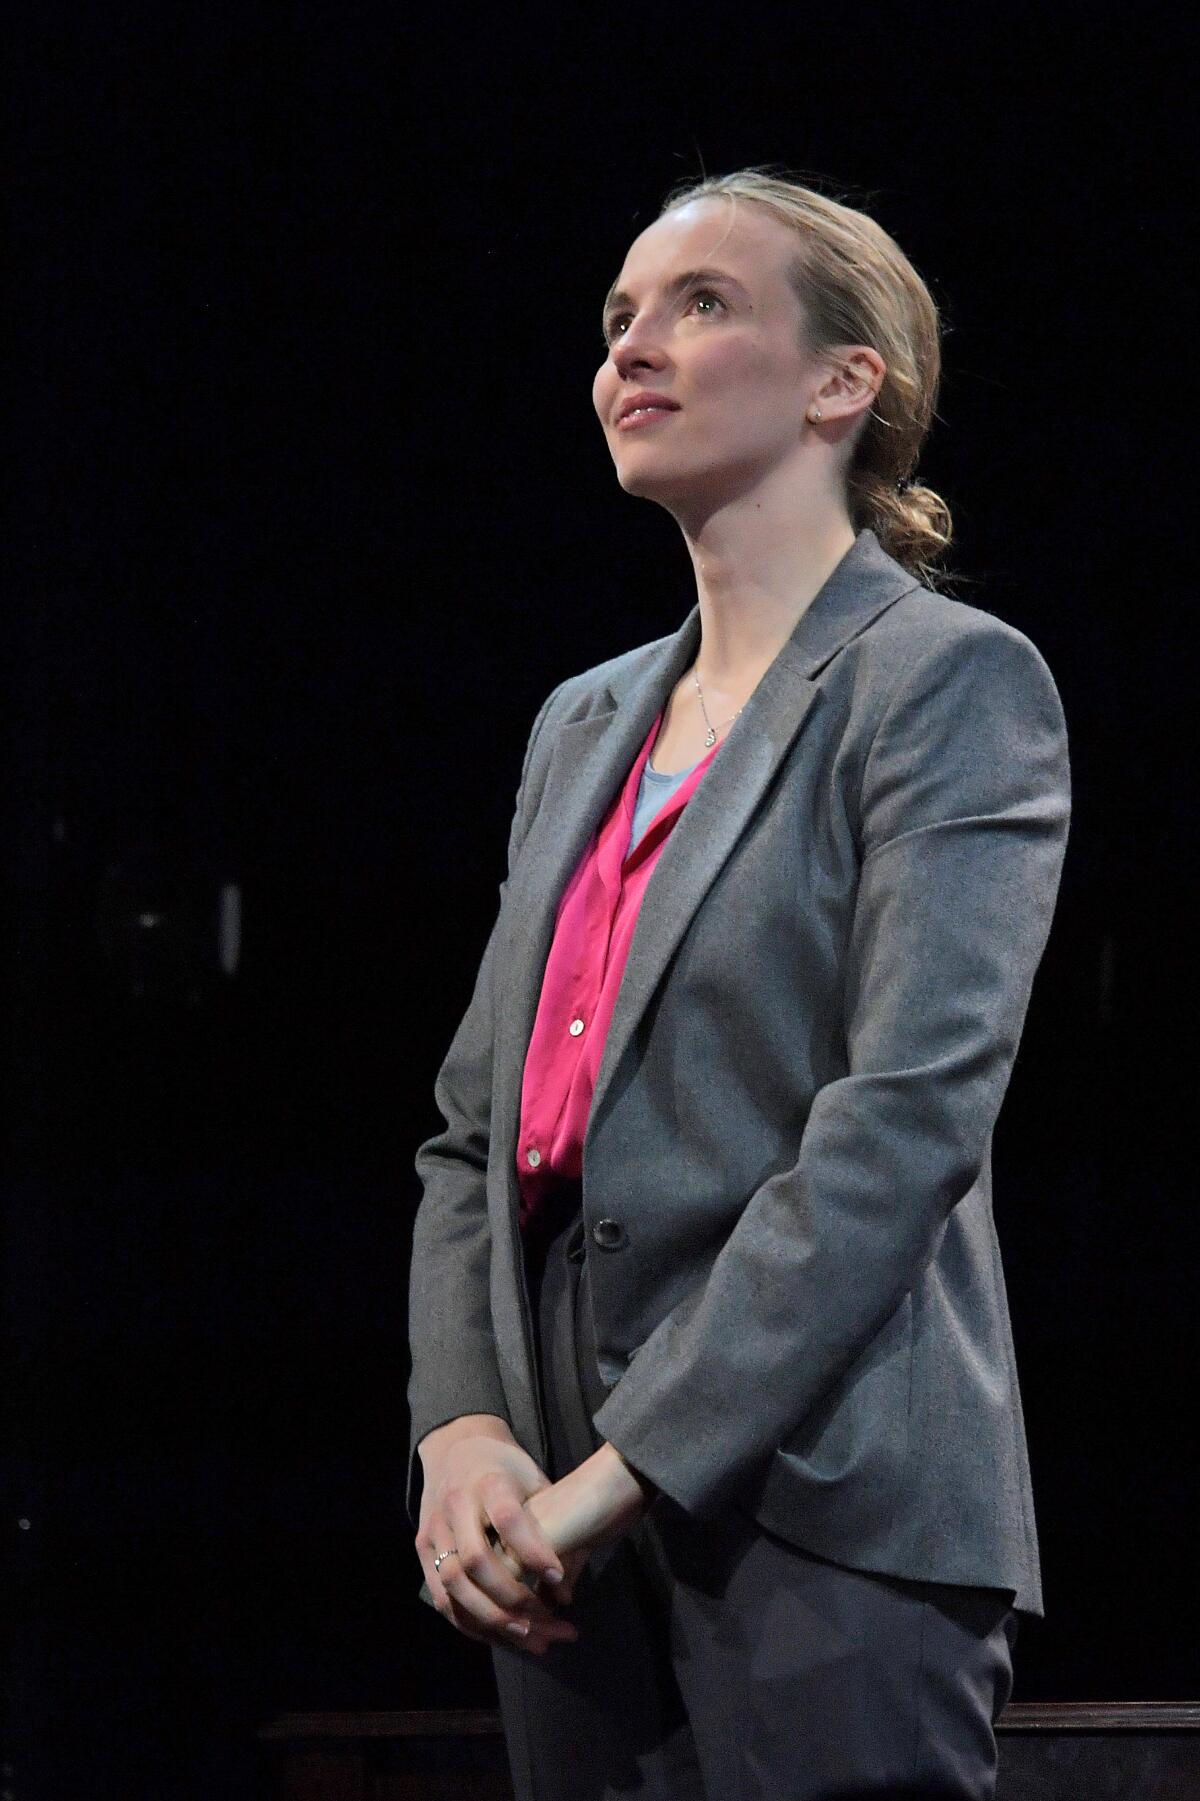 Jodie Comer, in a gray suit and pink shirt, stands with her hands folded on a dark stage.